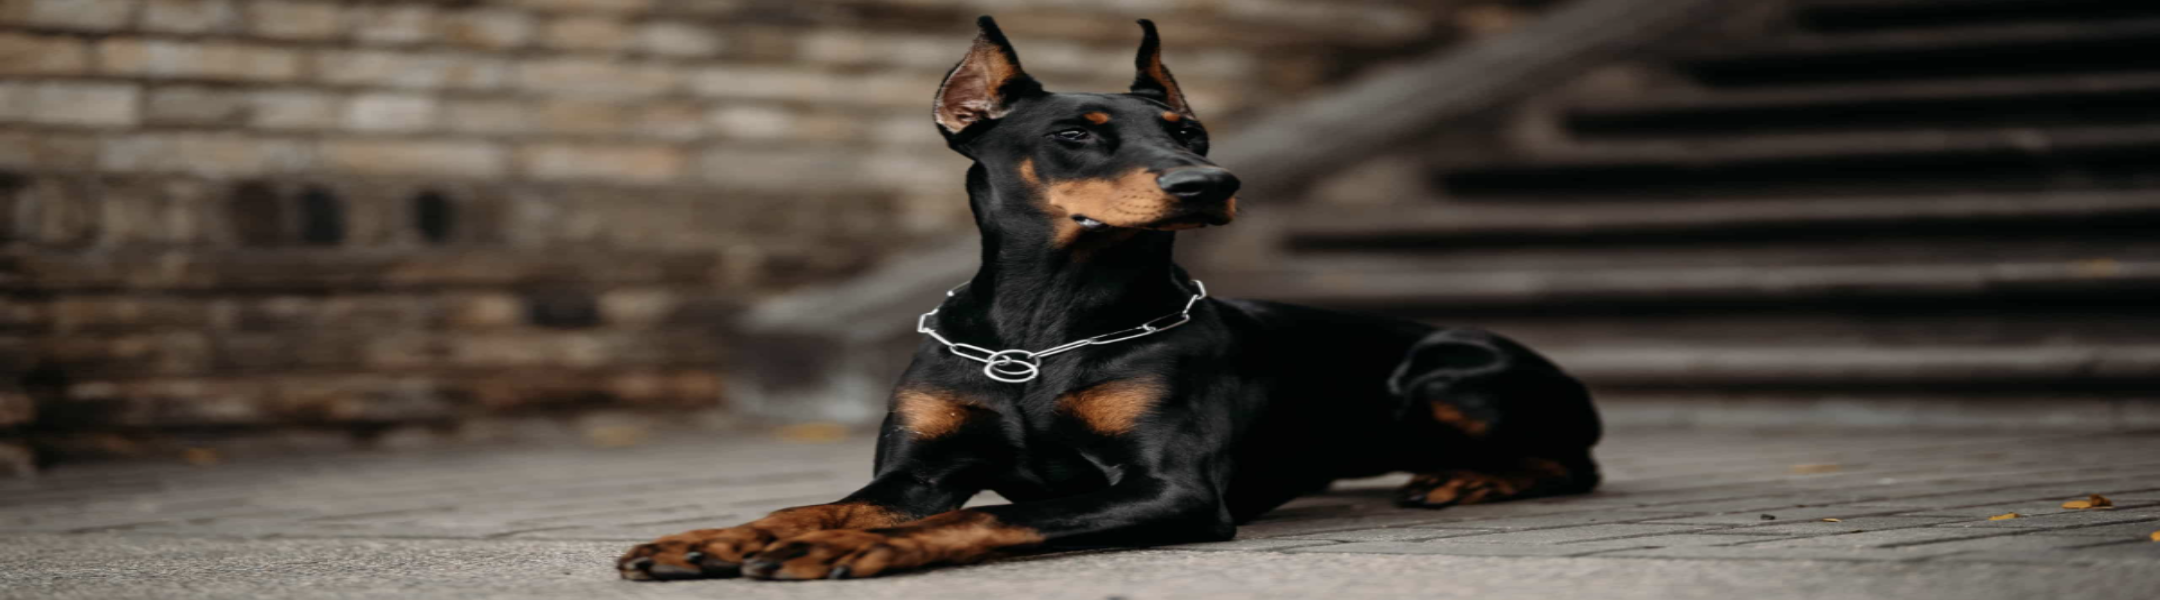 About The Breed | MunroKennels.com | Munro Industries mk-10090101 2160x600